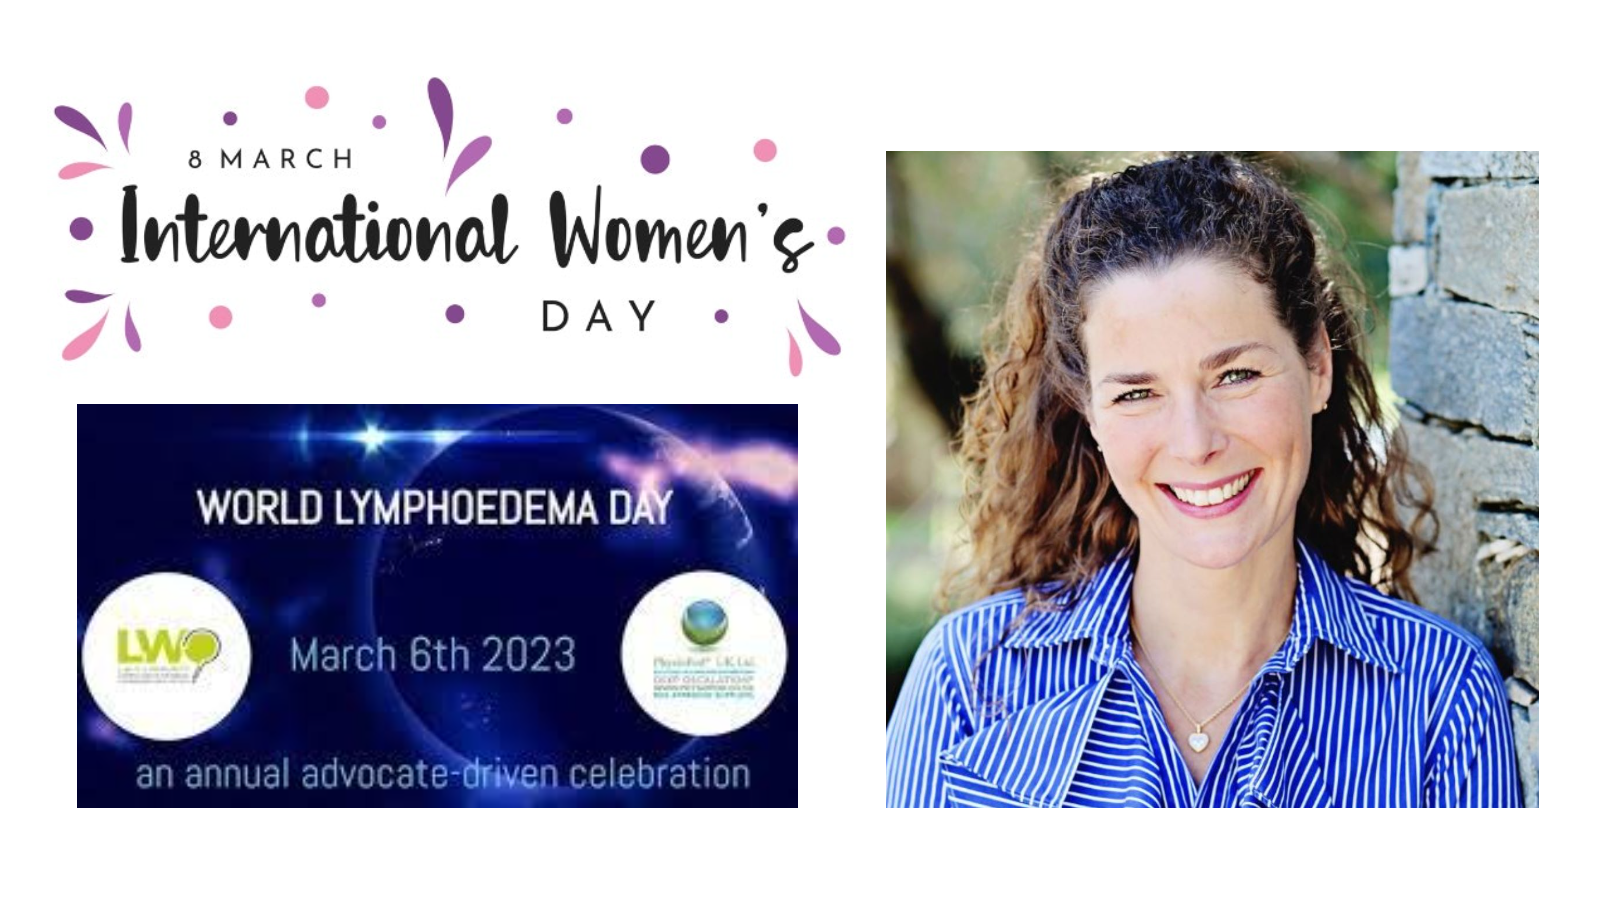 2023 International Womens Day and World Lymphoedema Day - Thank You's to Ladies in the Lymphoedema Community